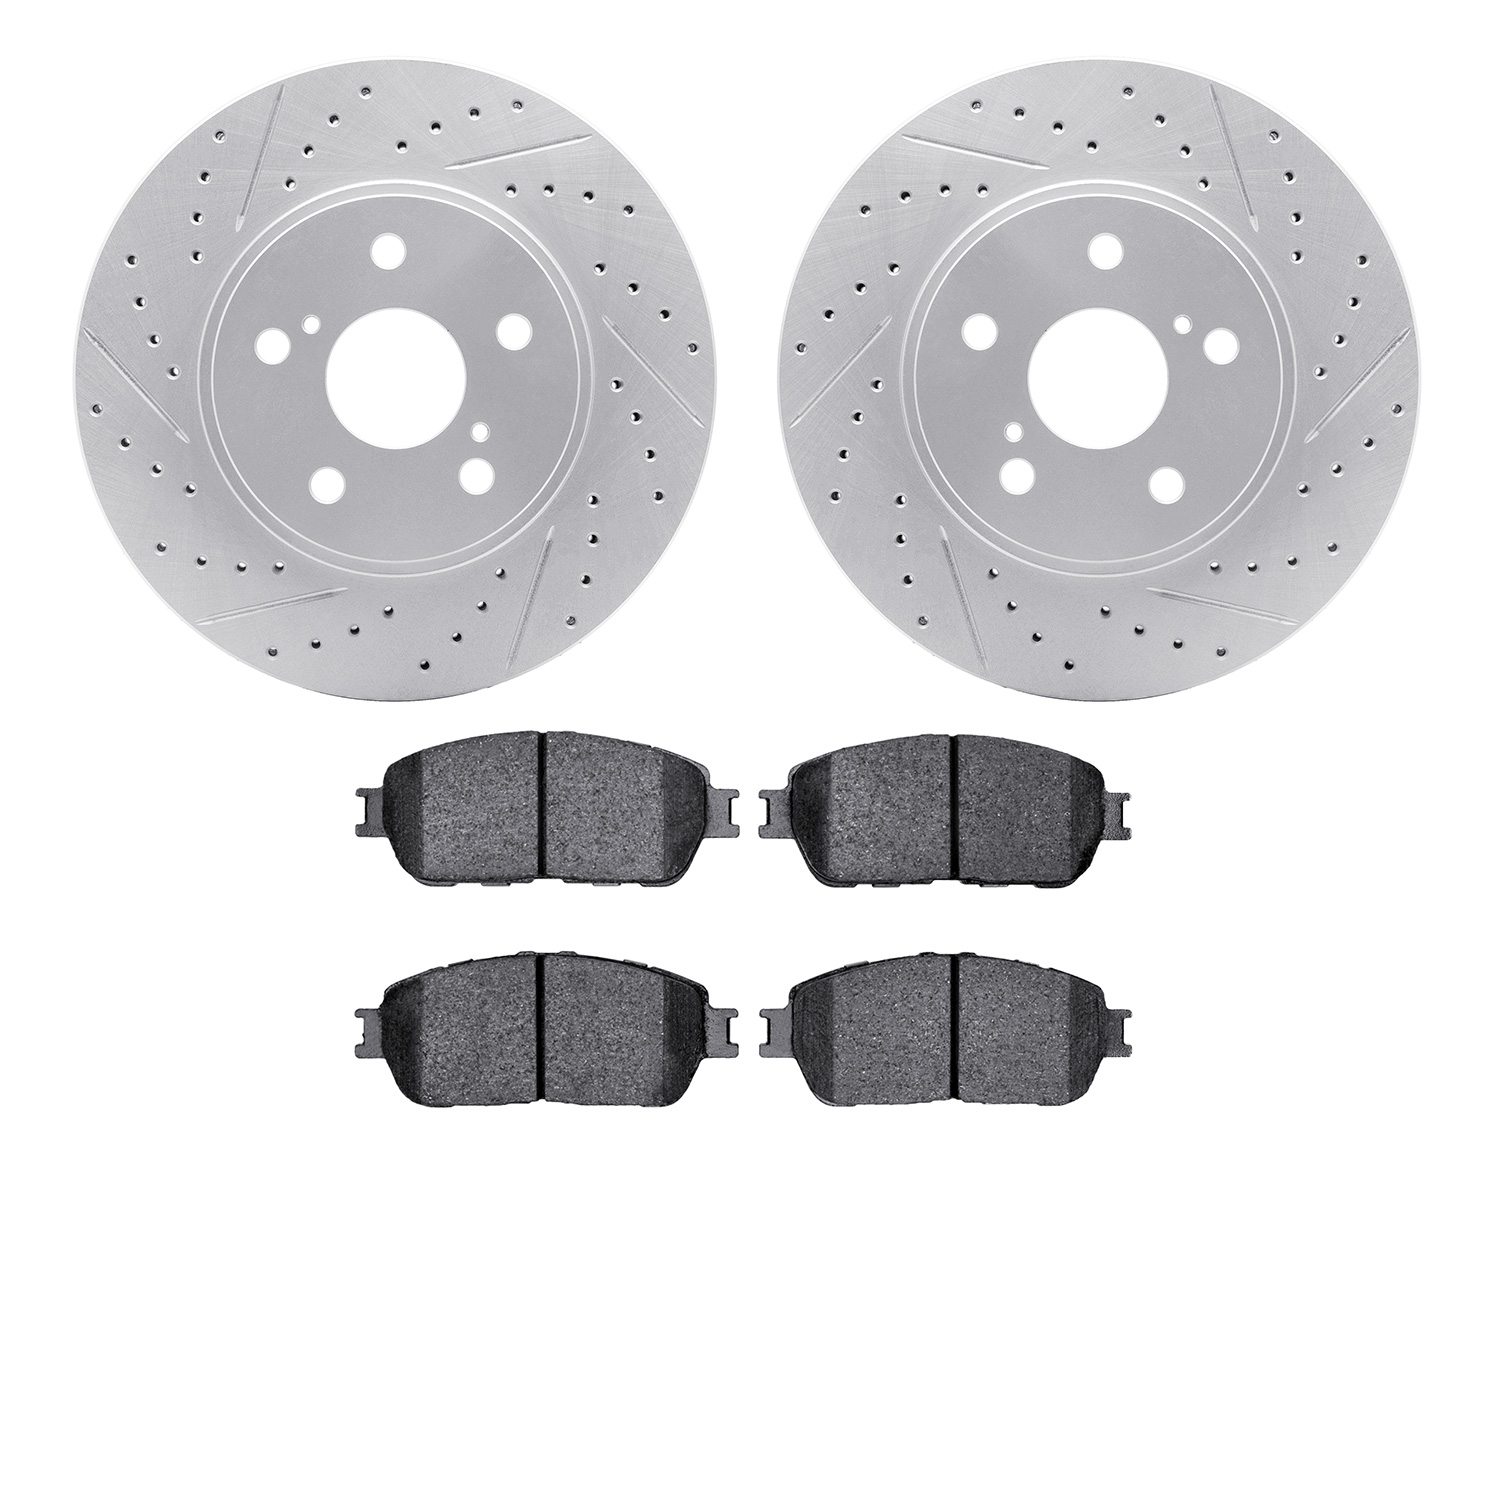 2502-76025 Geoperformance Drilled/Slotted Rotors w/5000 Advanced Brake Pads Kit, 2004-2010 Lexus/Toyota/Scion, Position: Front